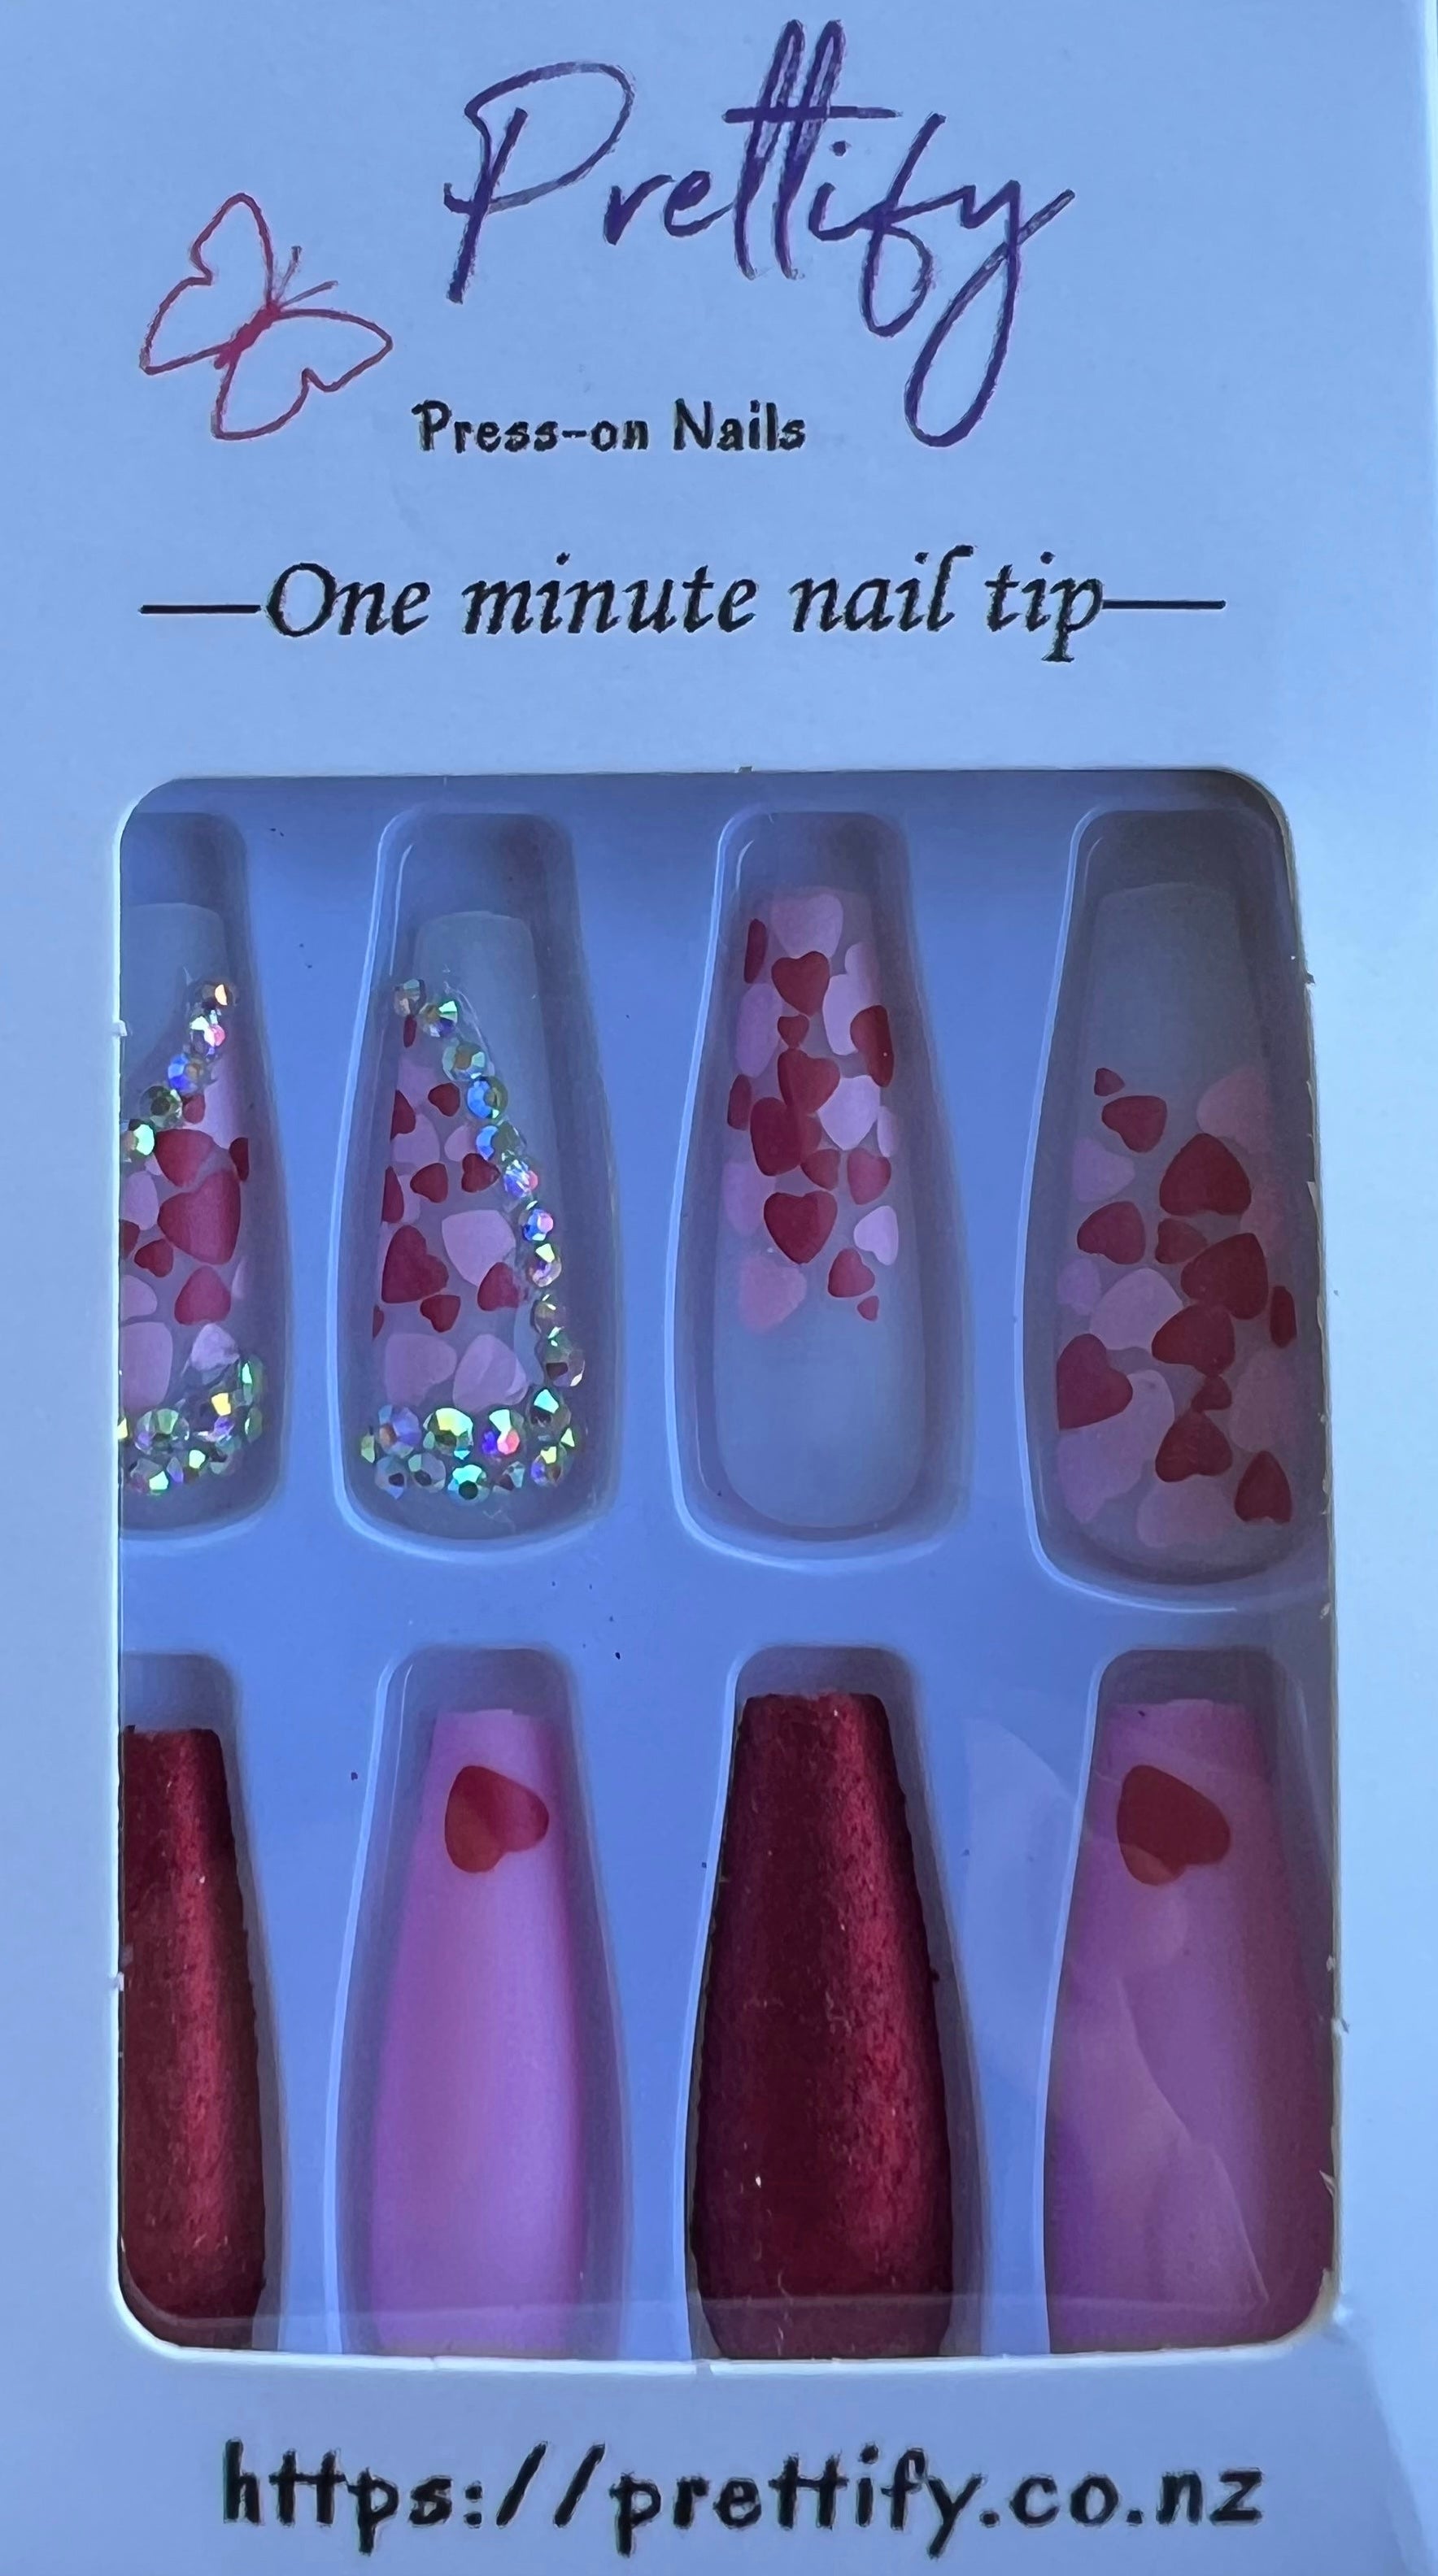 Long Coffin Press on Nails. Red & Pink Hearts & Jewels. Easy and quick to apply. Great for those special occasions, parties or add an edge to any outfit. Gorgeous, flattering and you can re-use them again and again.